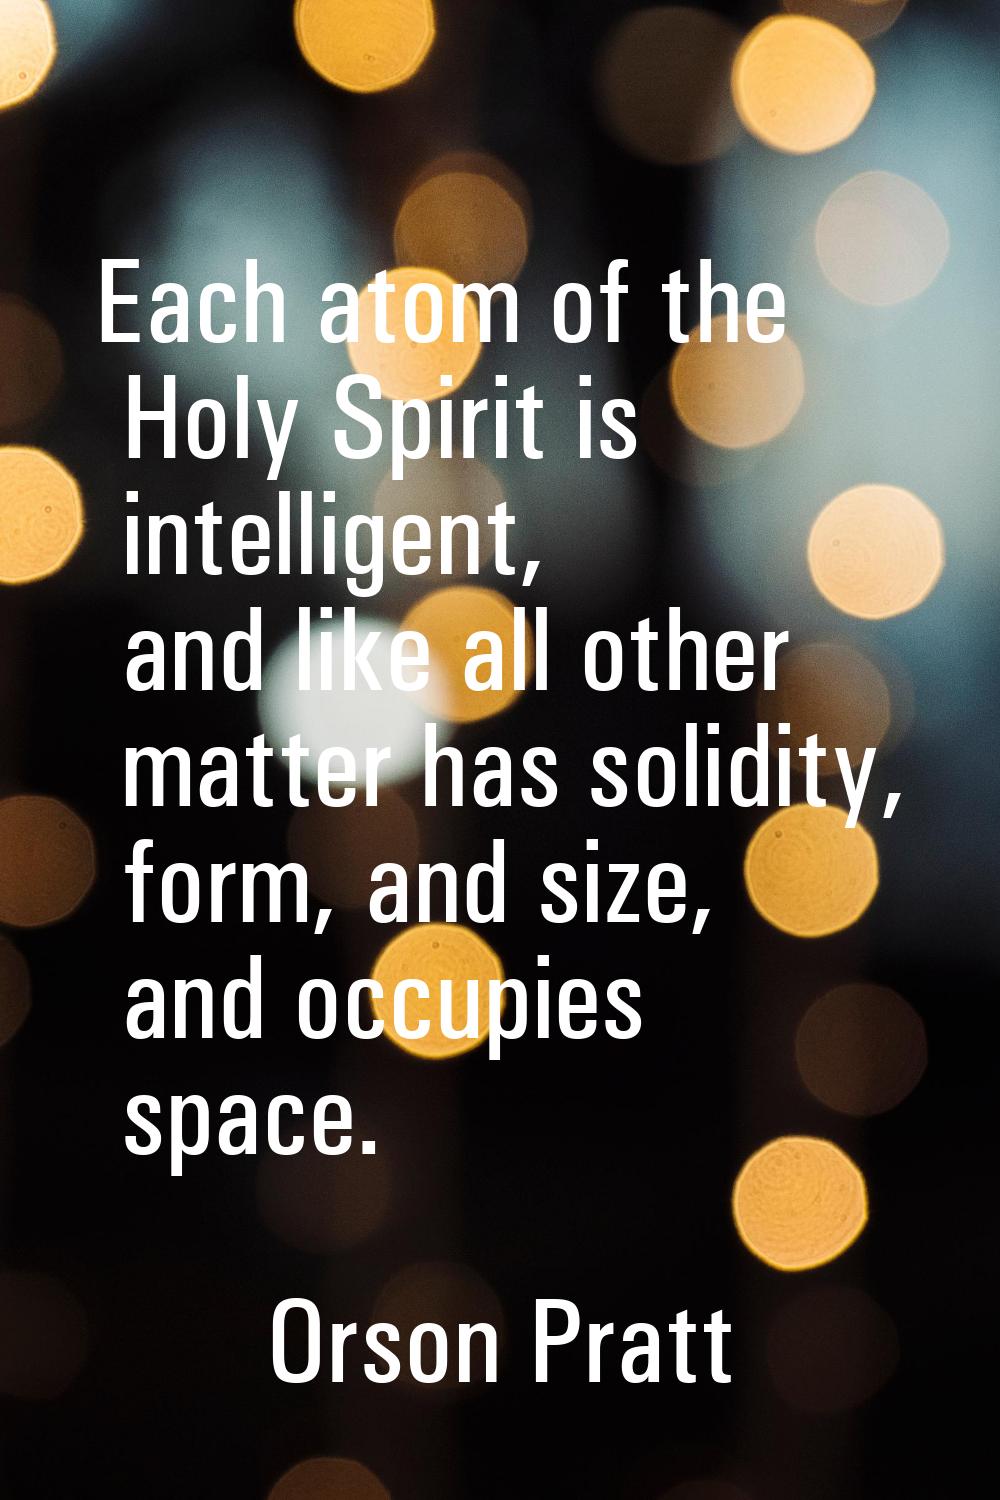 Each atom of the Holy Spirit is intelligent, and like all other matter has solidity, form, and size